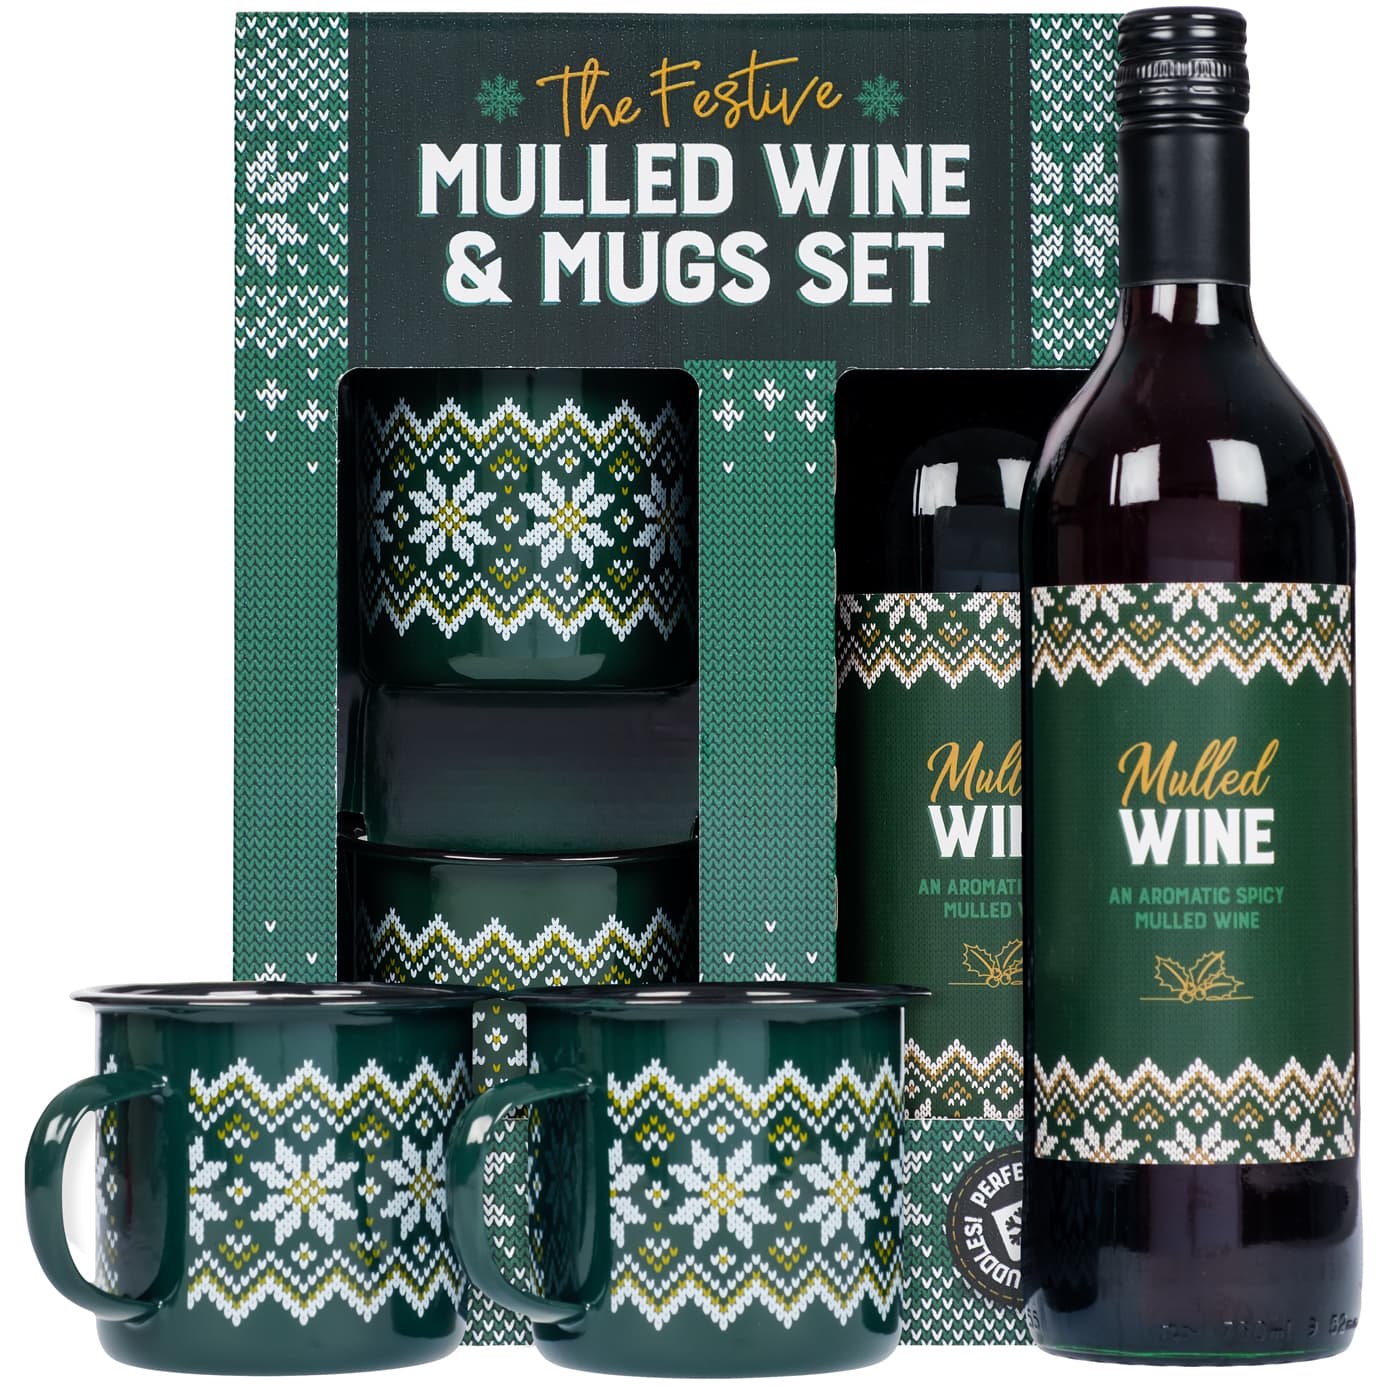 https://www.bmstores.co.uk/images/hpcProductImage/imgSource/403516-the-festive-mulled-wine-and-mugs-set1.jpg